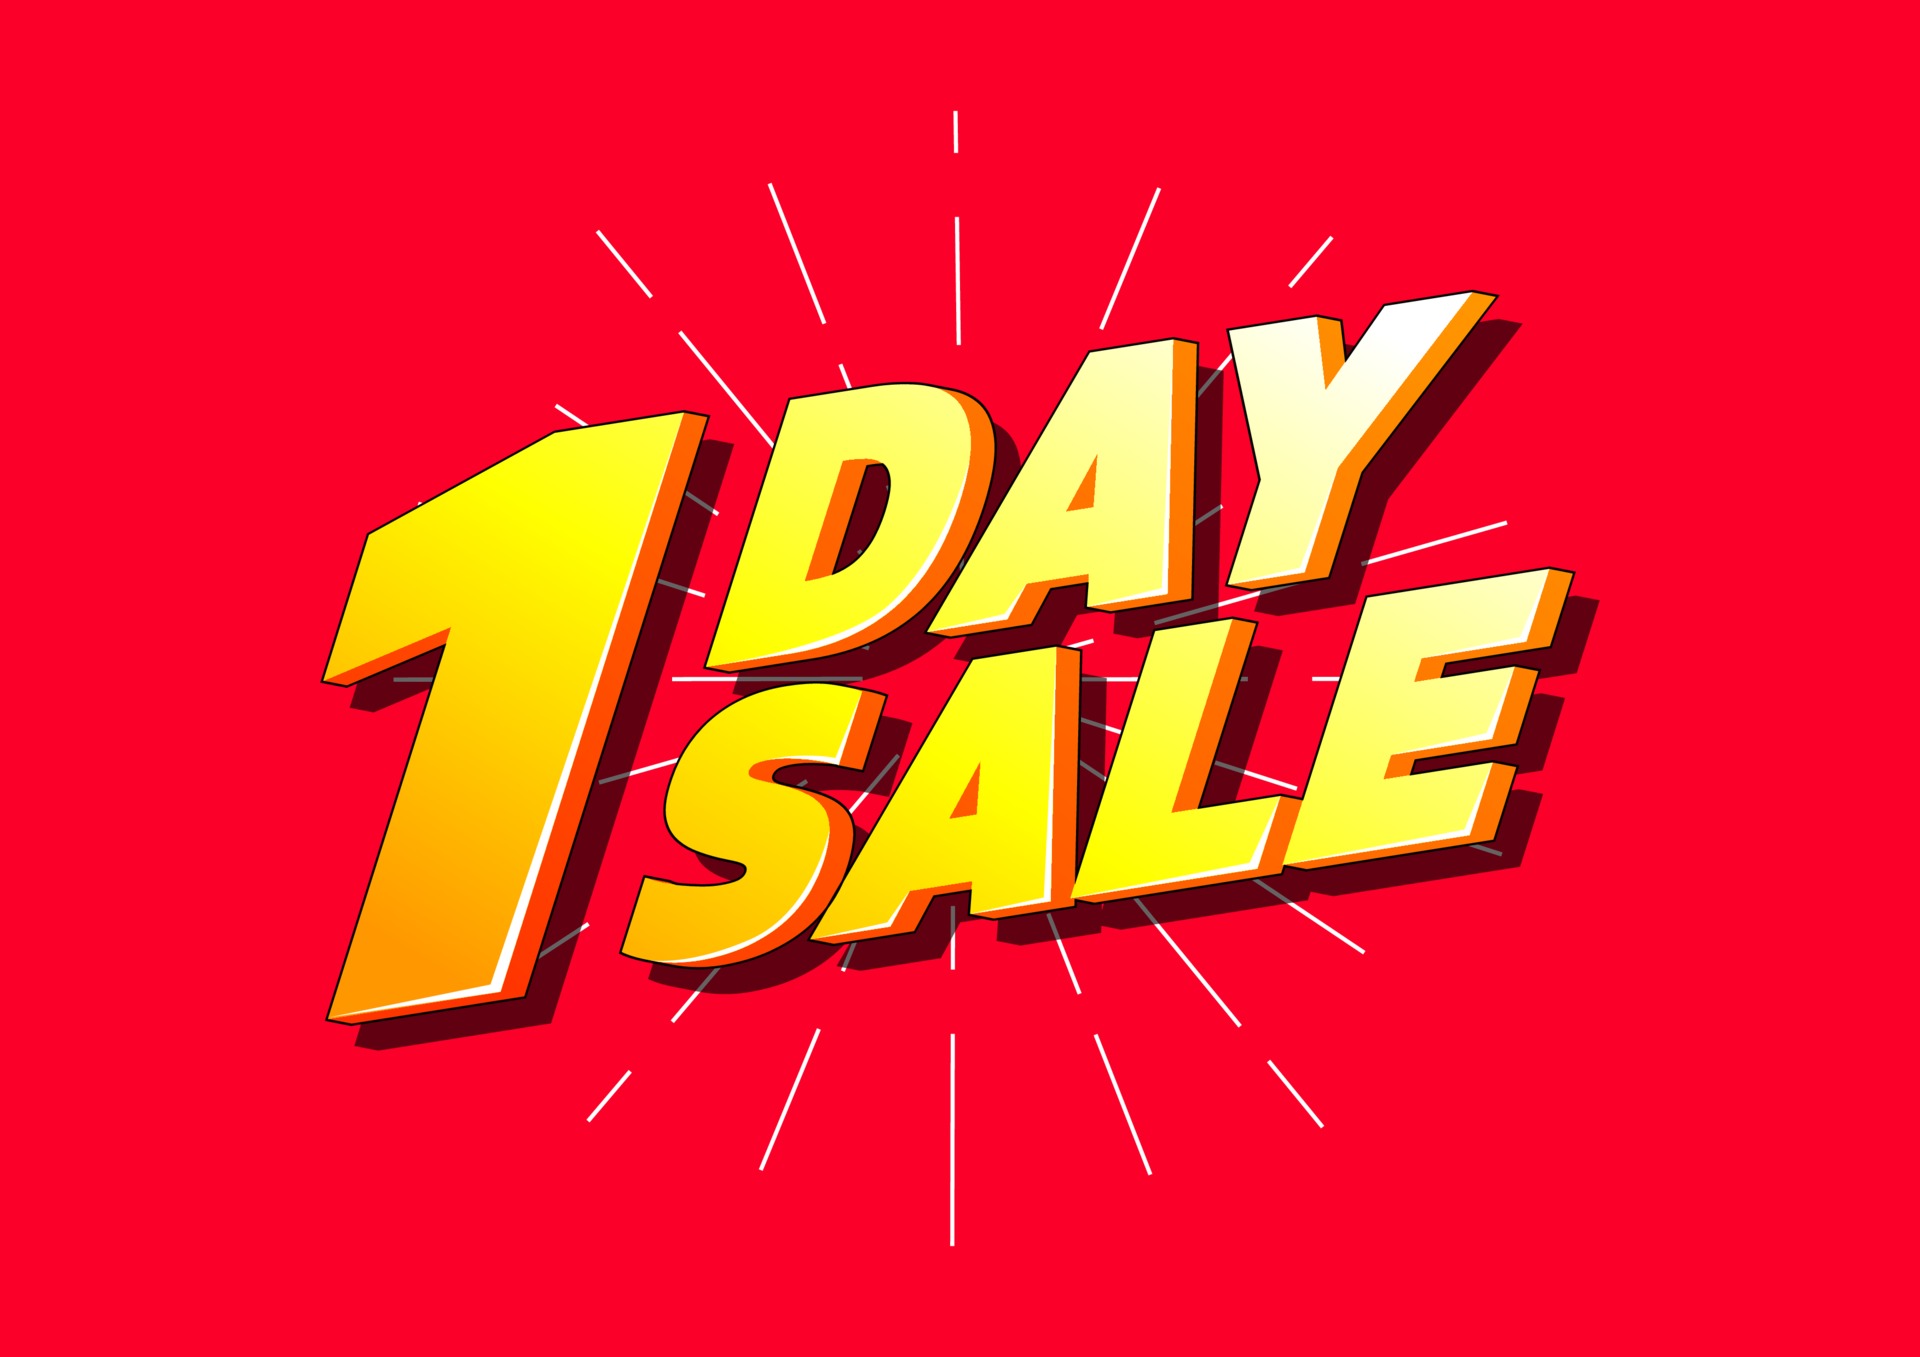 One Day Sale